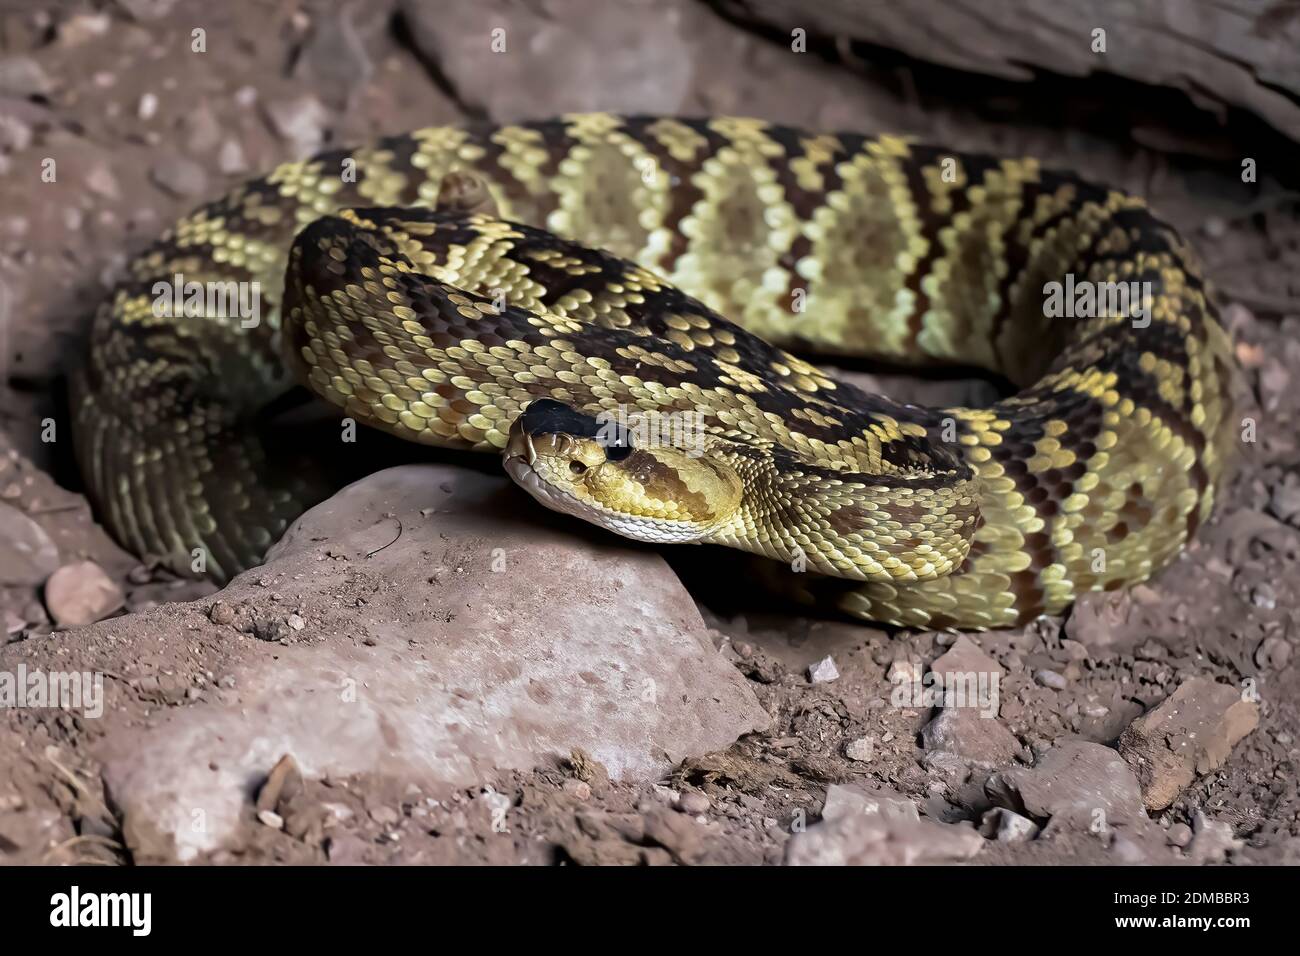 Black tailed rattlesnake coiled on dirt ground up close low angle view. Stock Photo